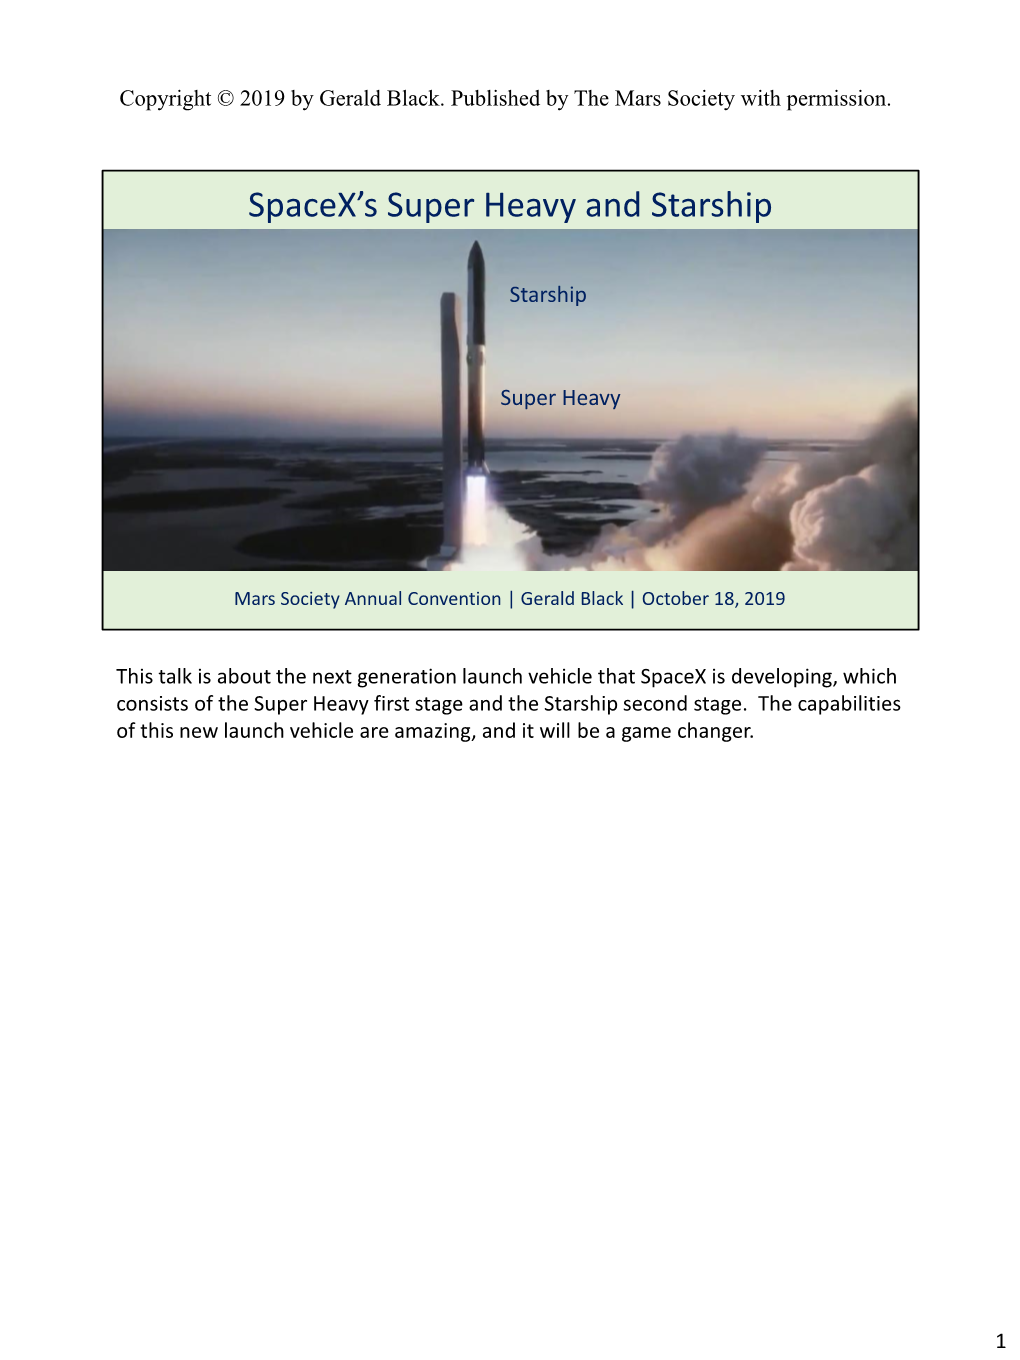 Spacex's Super Heavy and Starship